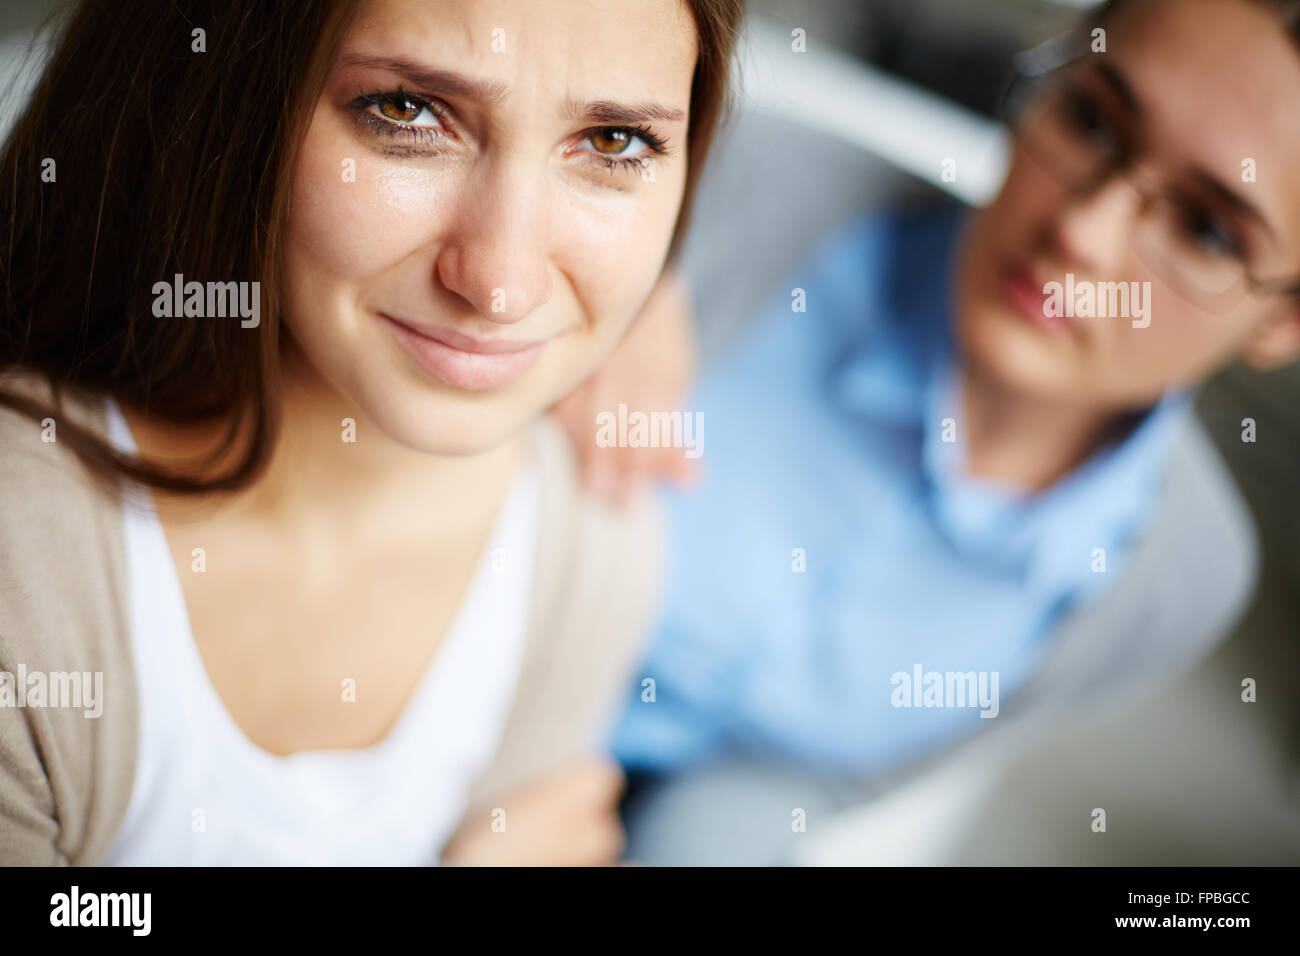 Woman crying and her friend supporting her in the background Stock Photo